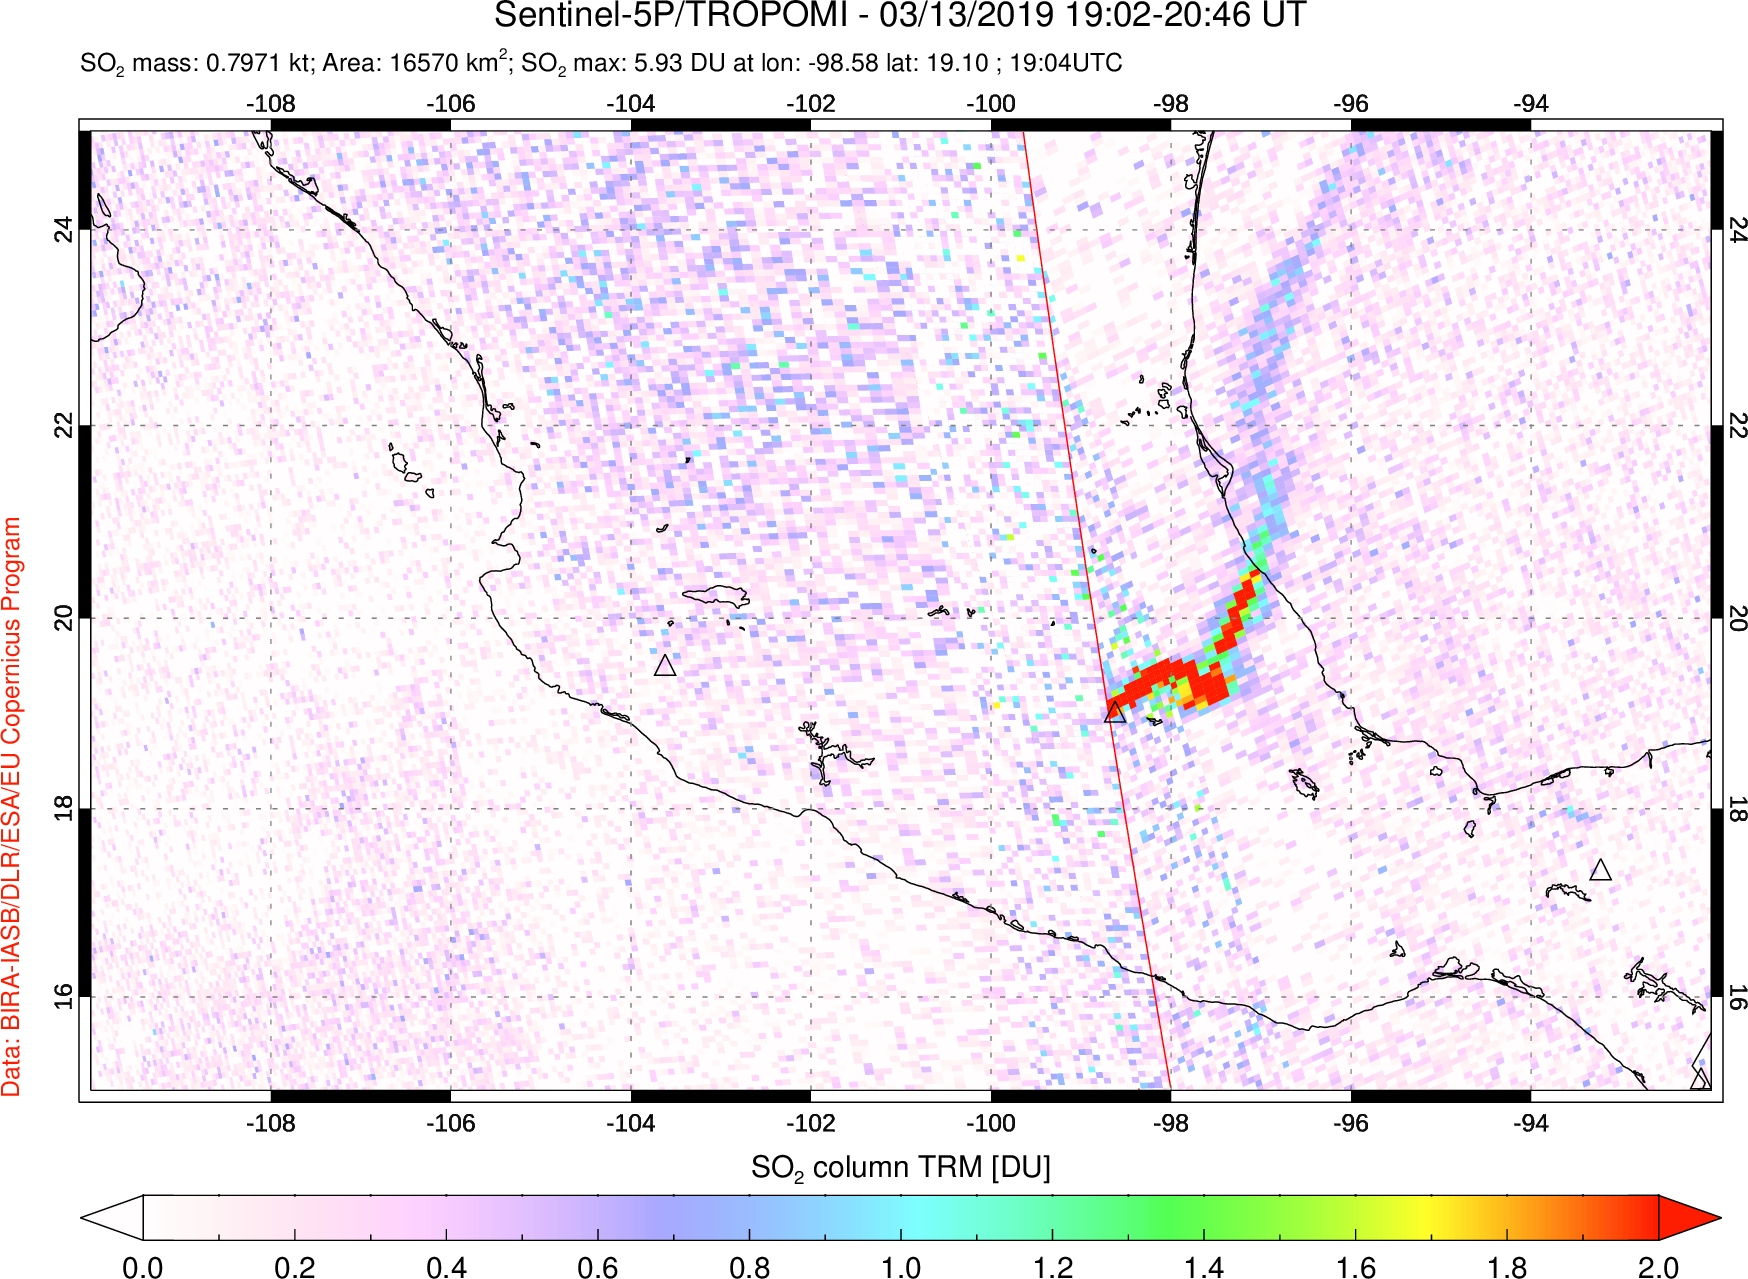 A sulfur dioxide image over Mexico on Mar 13, 2019.